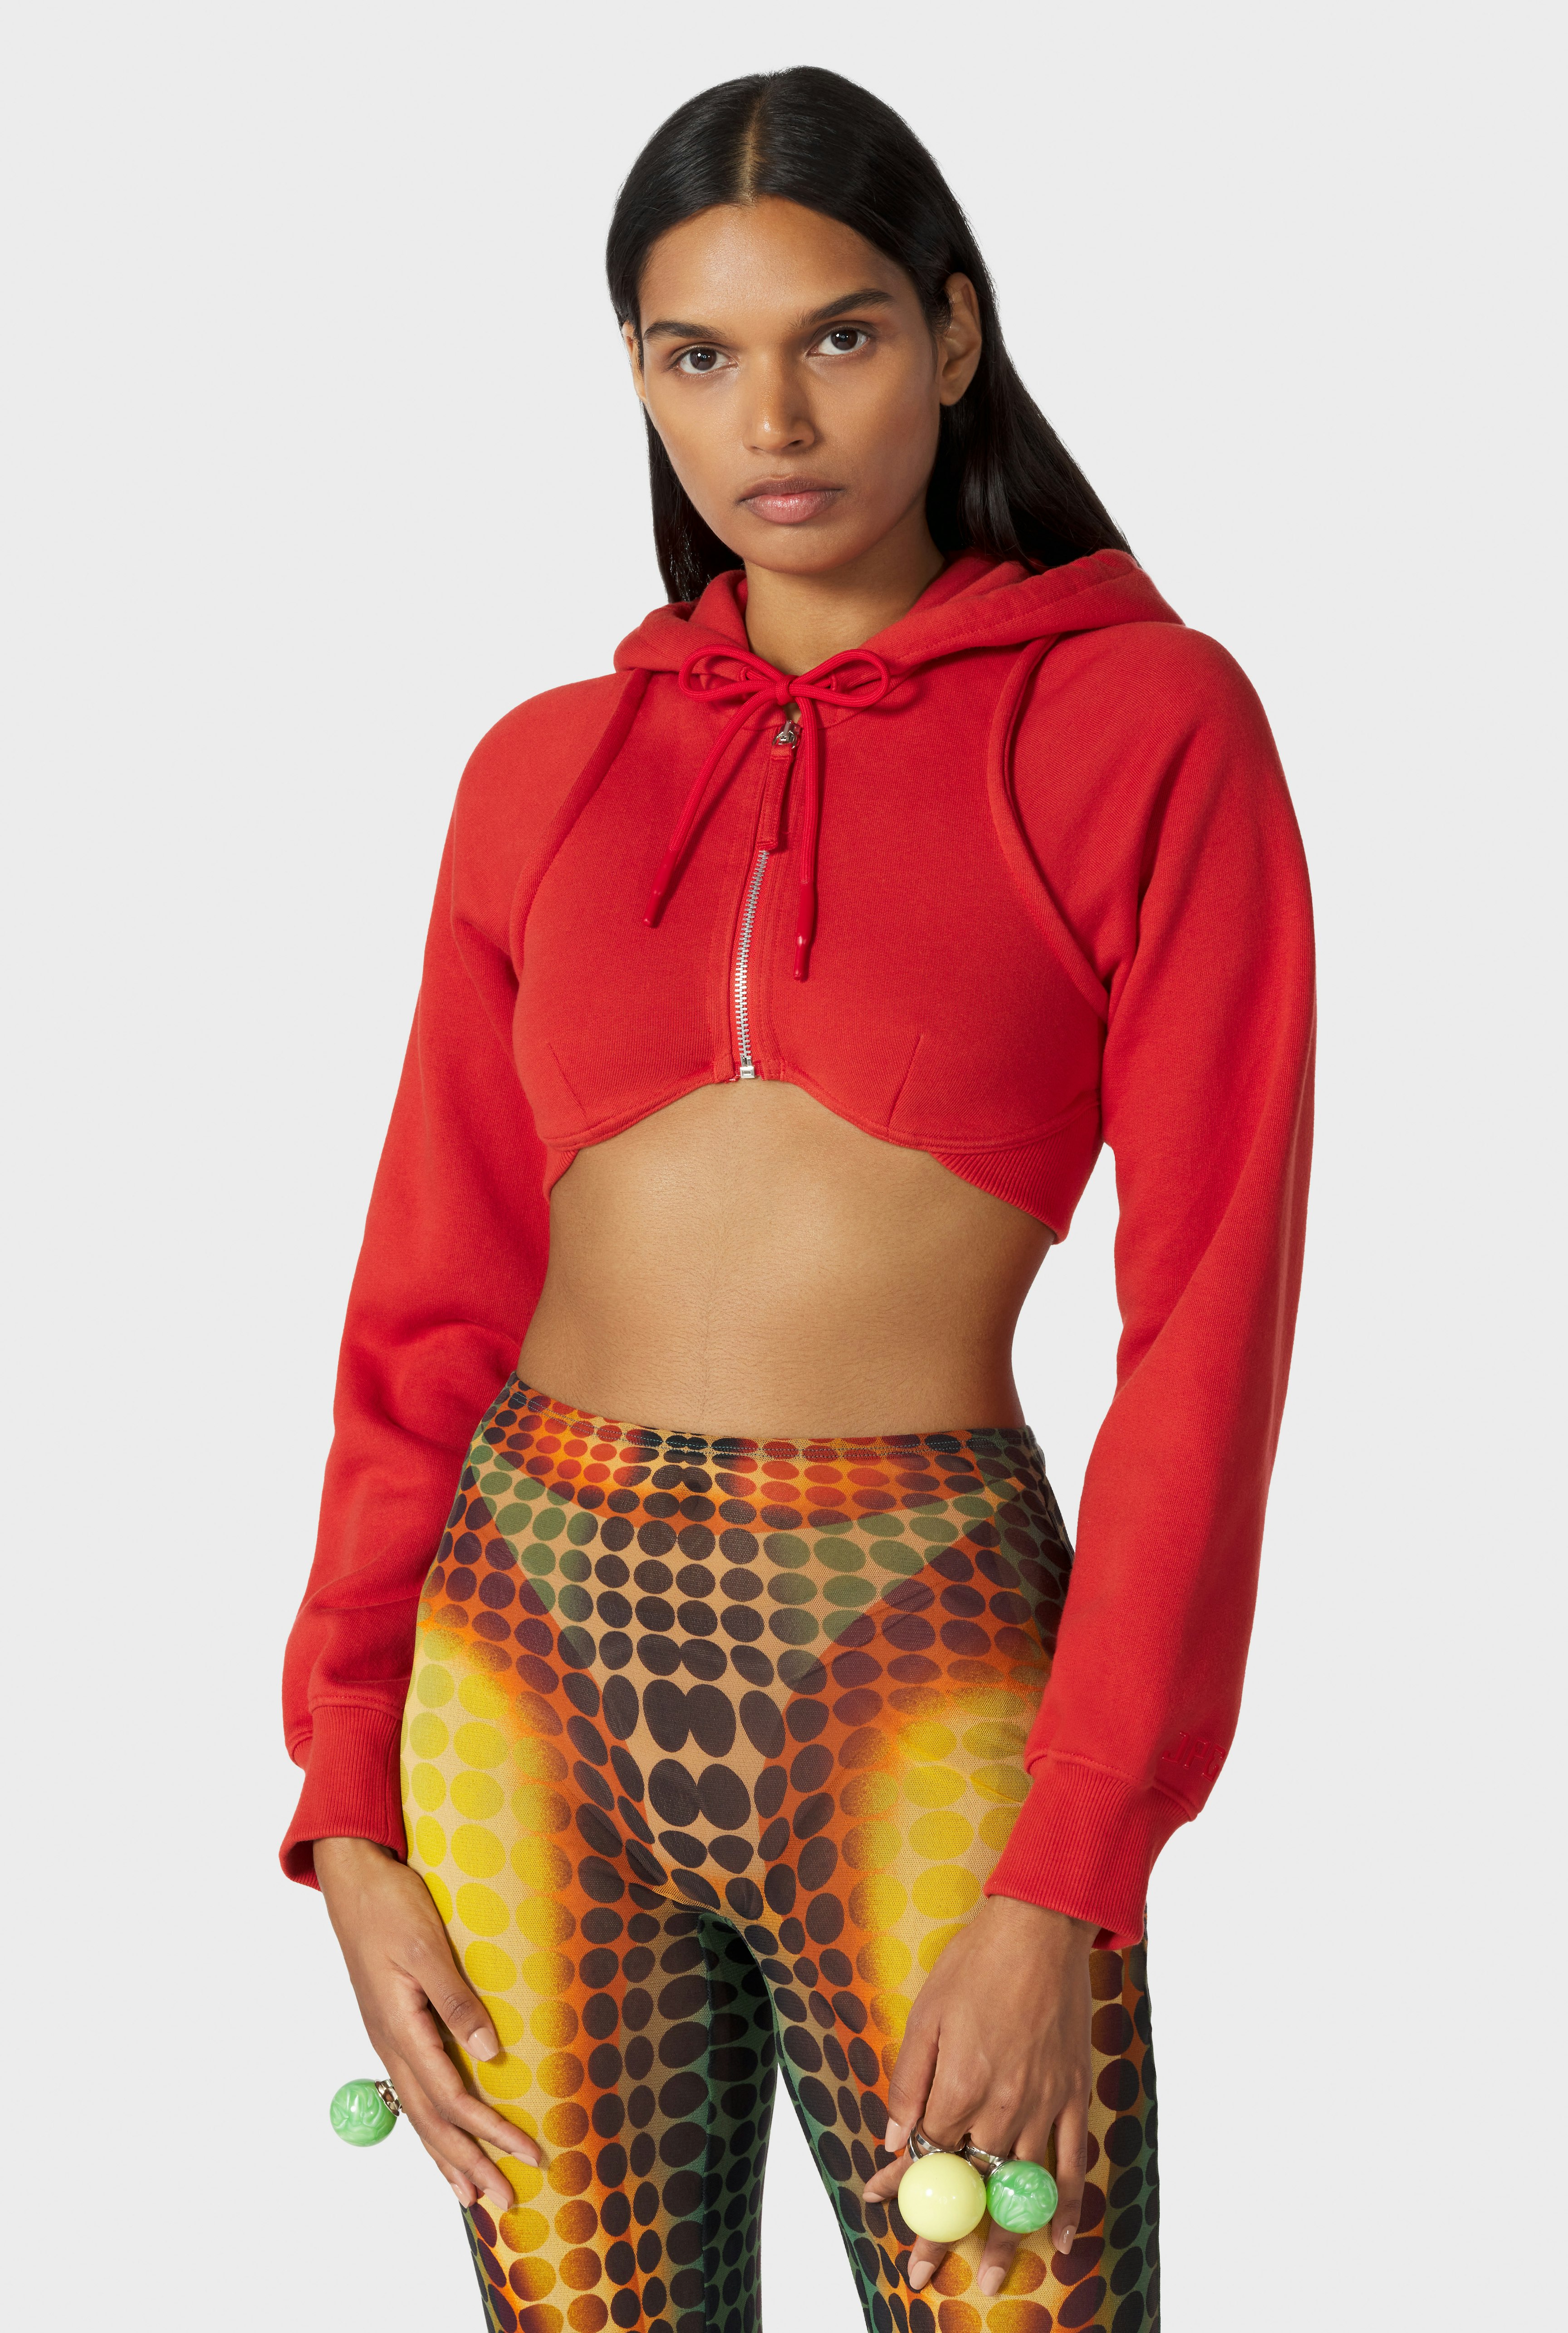 The Red Cropped Sweatshirt 